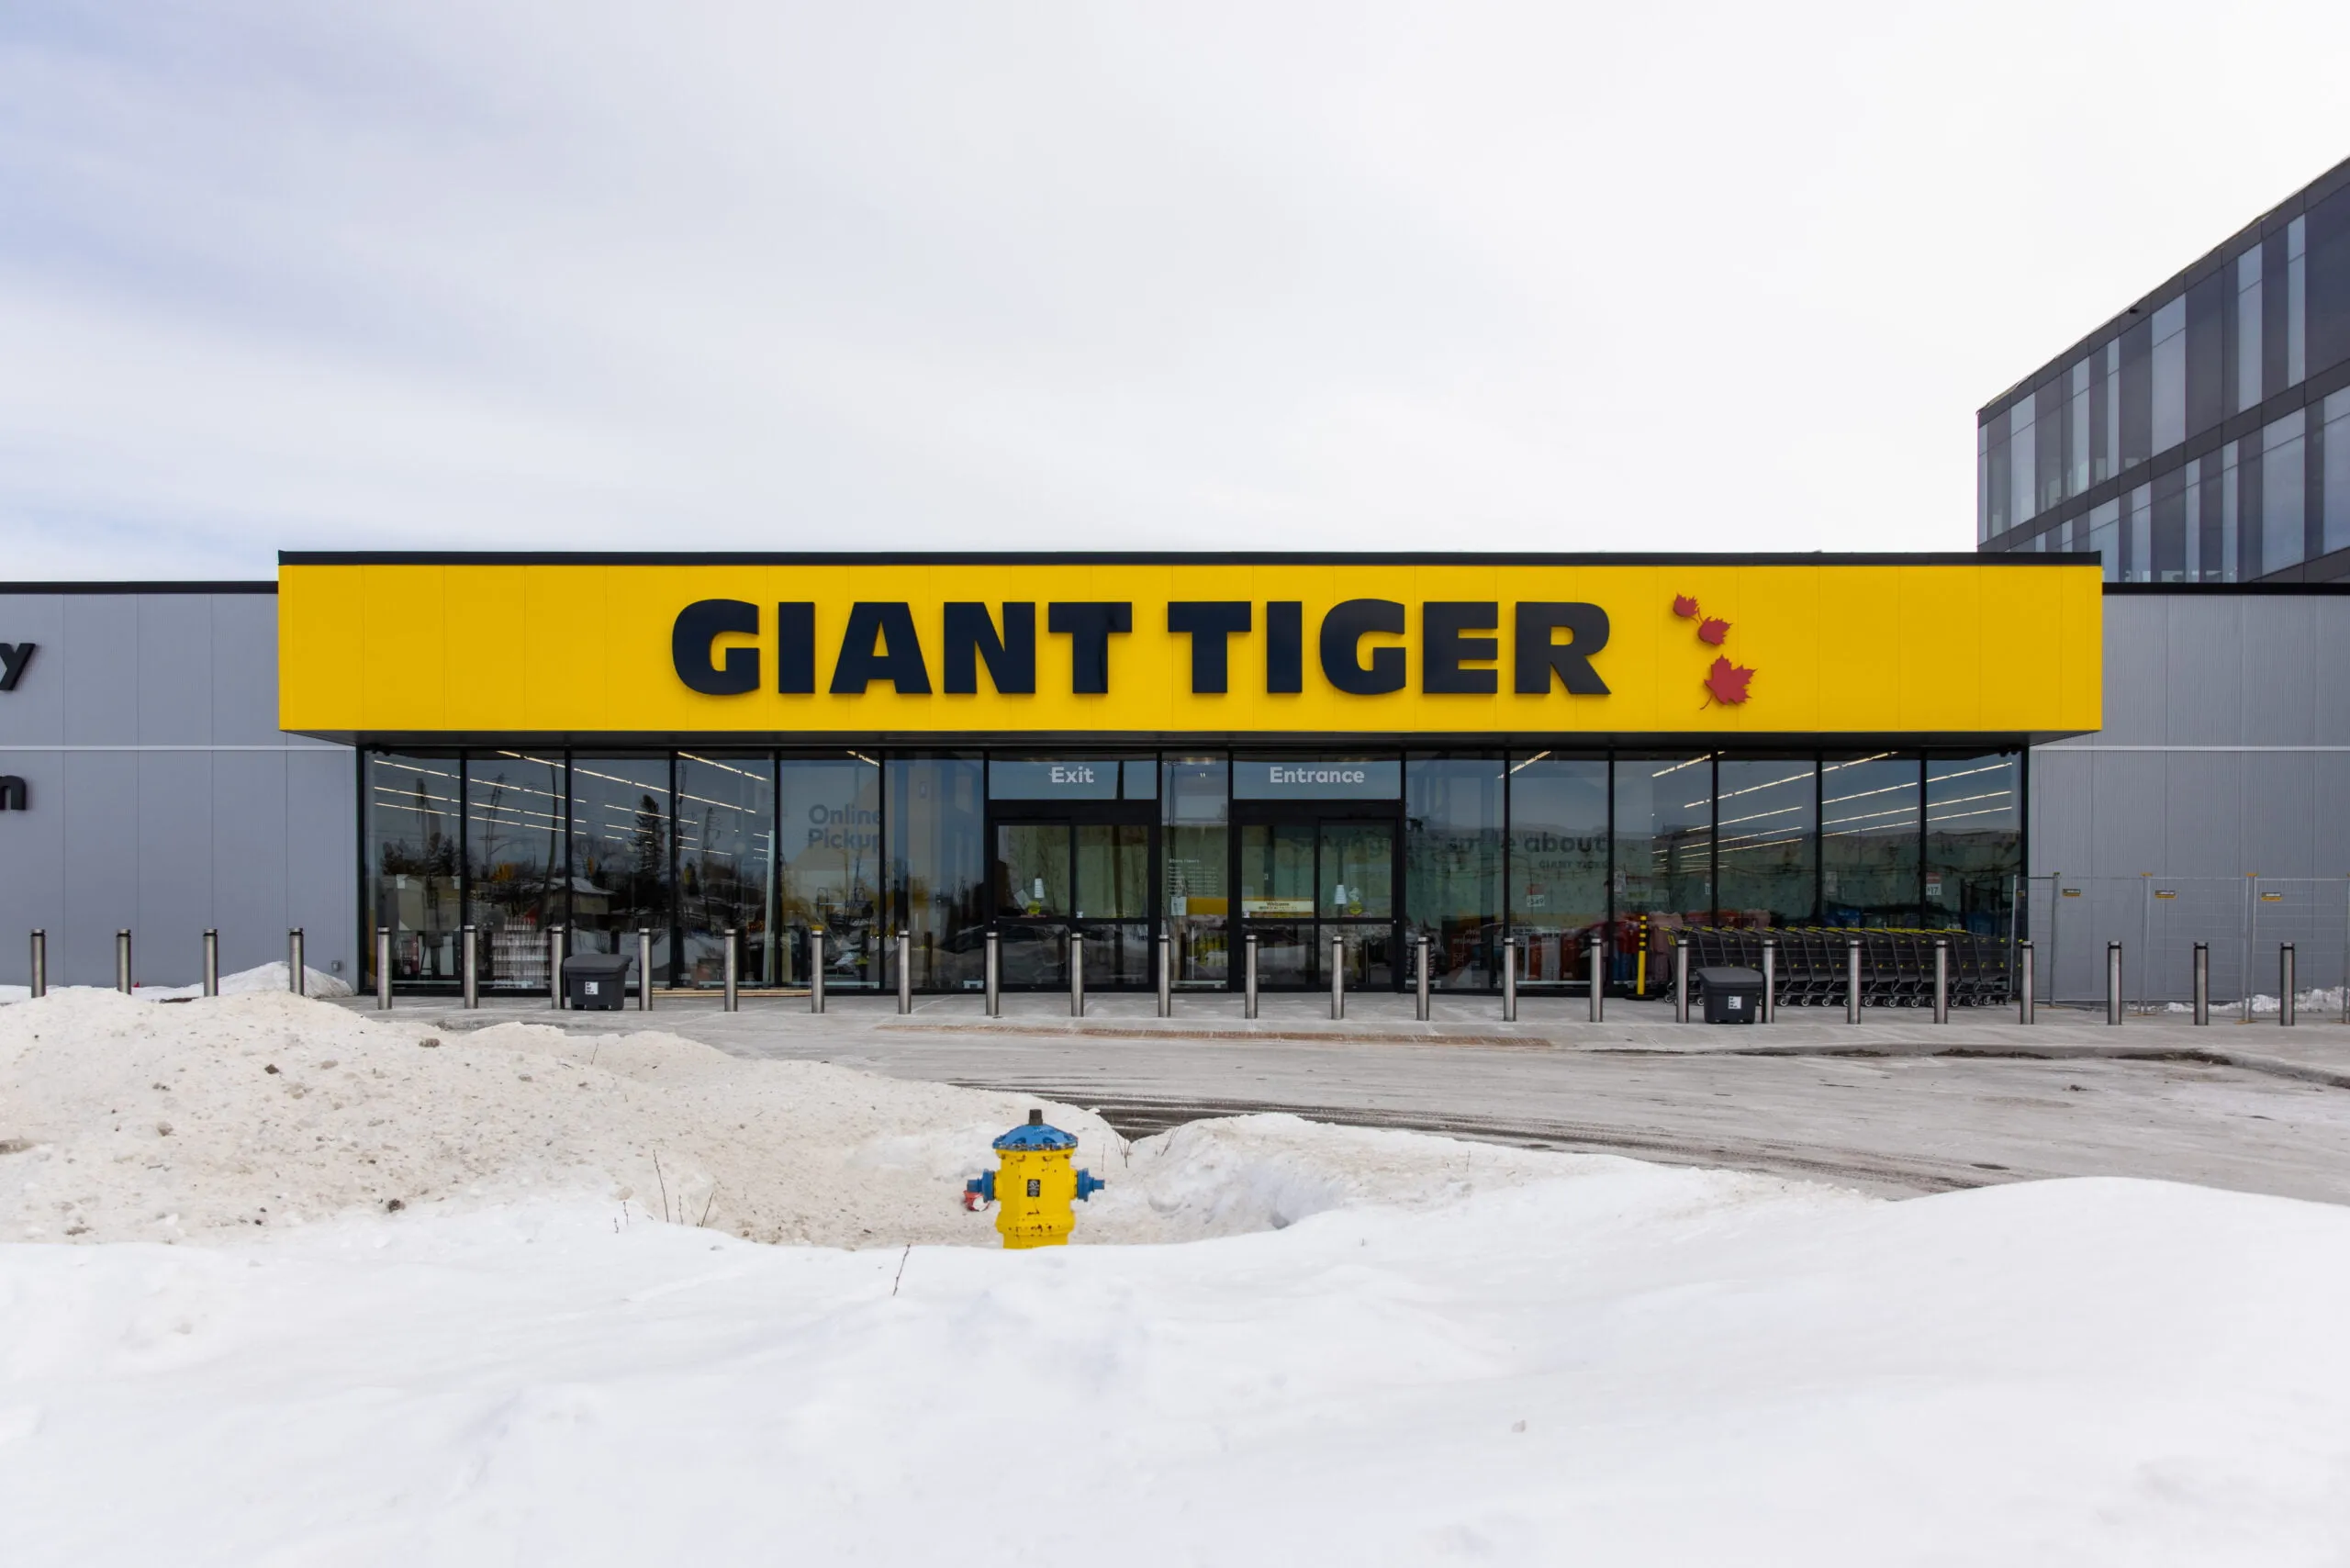 Giant Tiger in Canada, north_america | Fragrance,Handbags,Shoes,Clothes,Cosmetics,Sportswear,Travel Bags - Country Helper